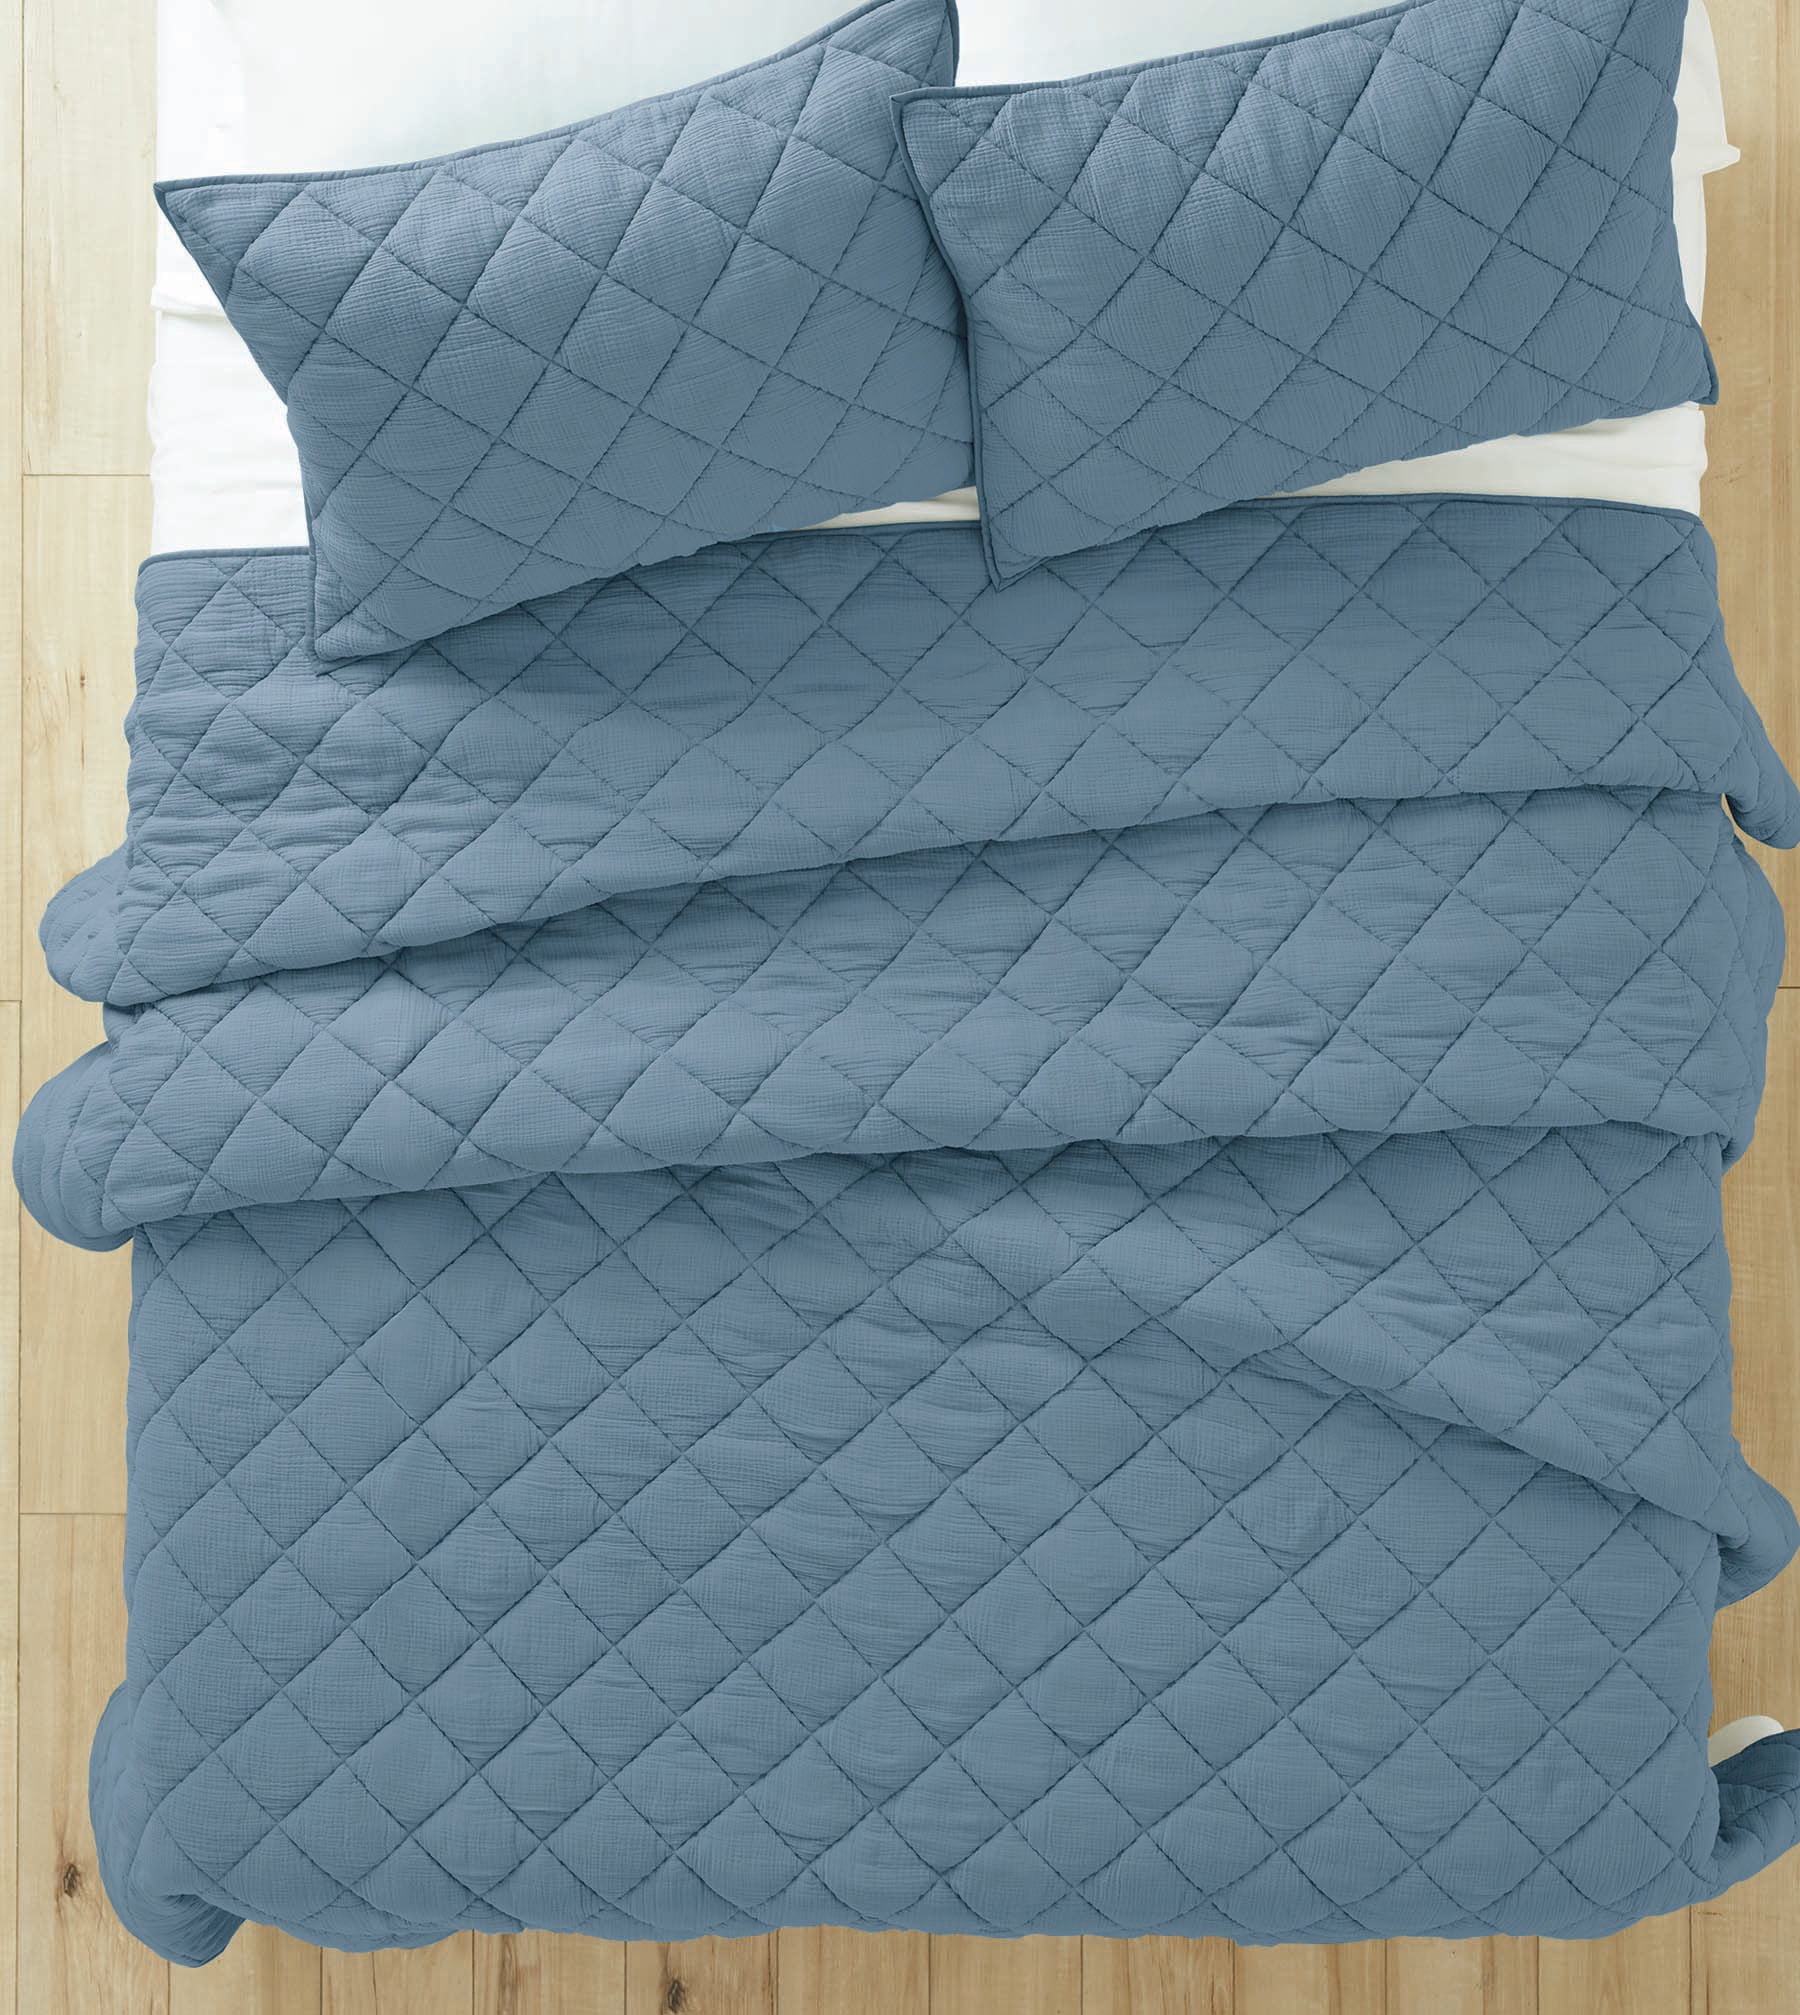 Select Walmart Stores: Better Homes & Gardens Blue Diamond Gauze Quilt: Queen $6 & More + Free S/H on $35+